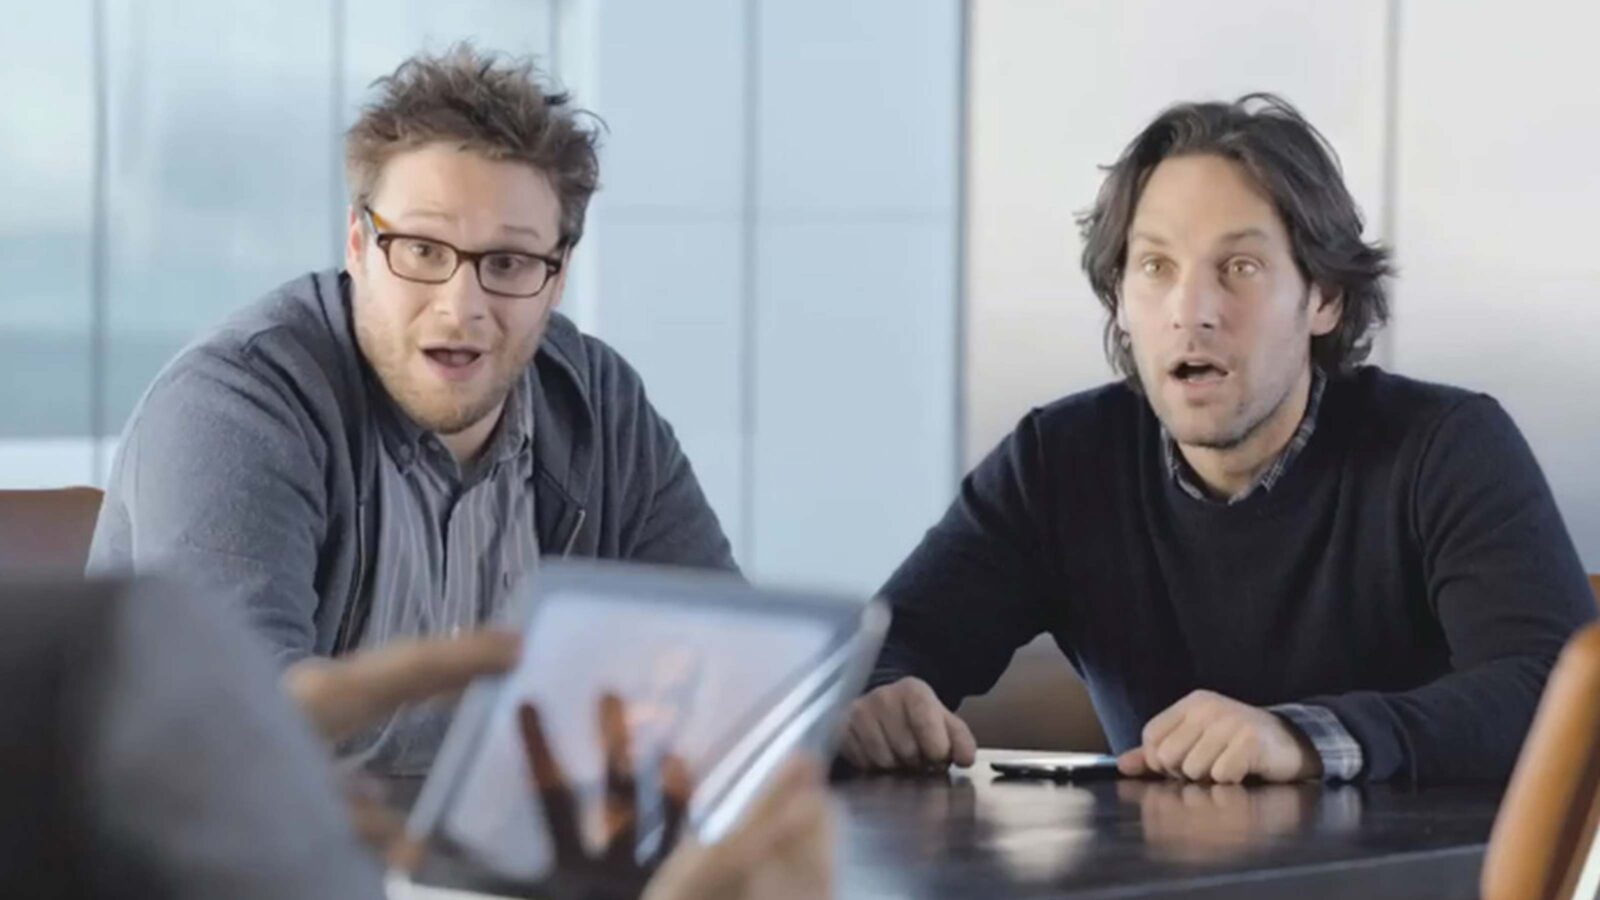 paul rudd and seth rogan in a samsung commercial